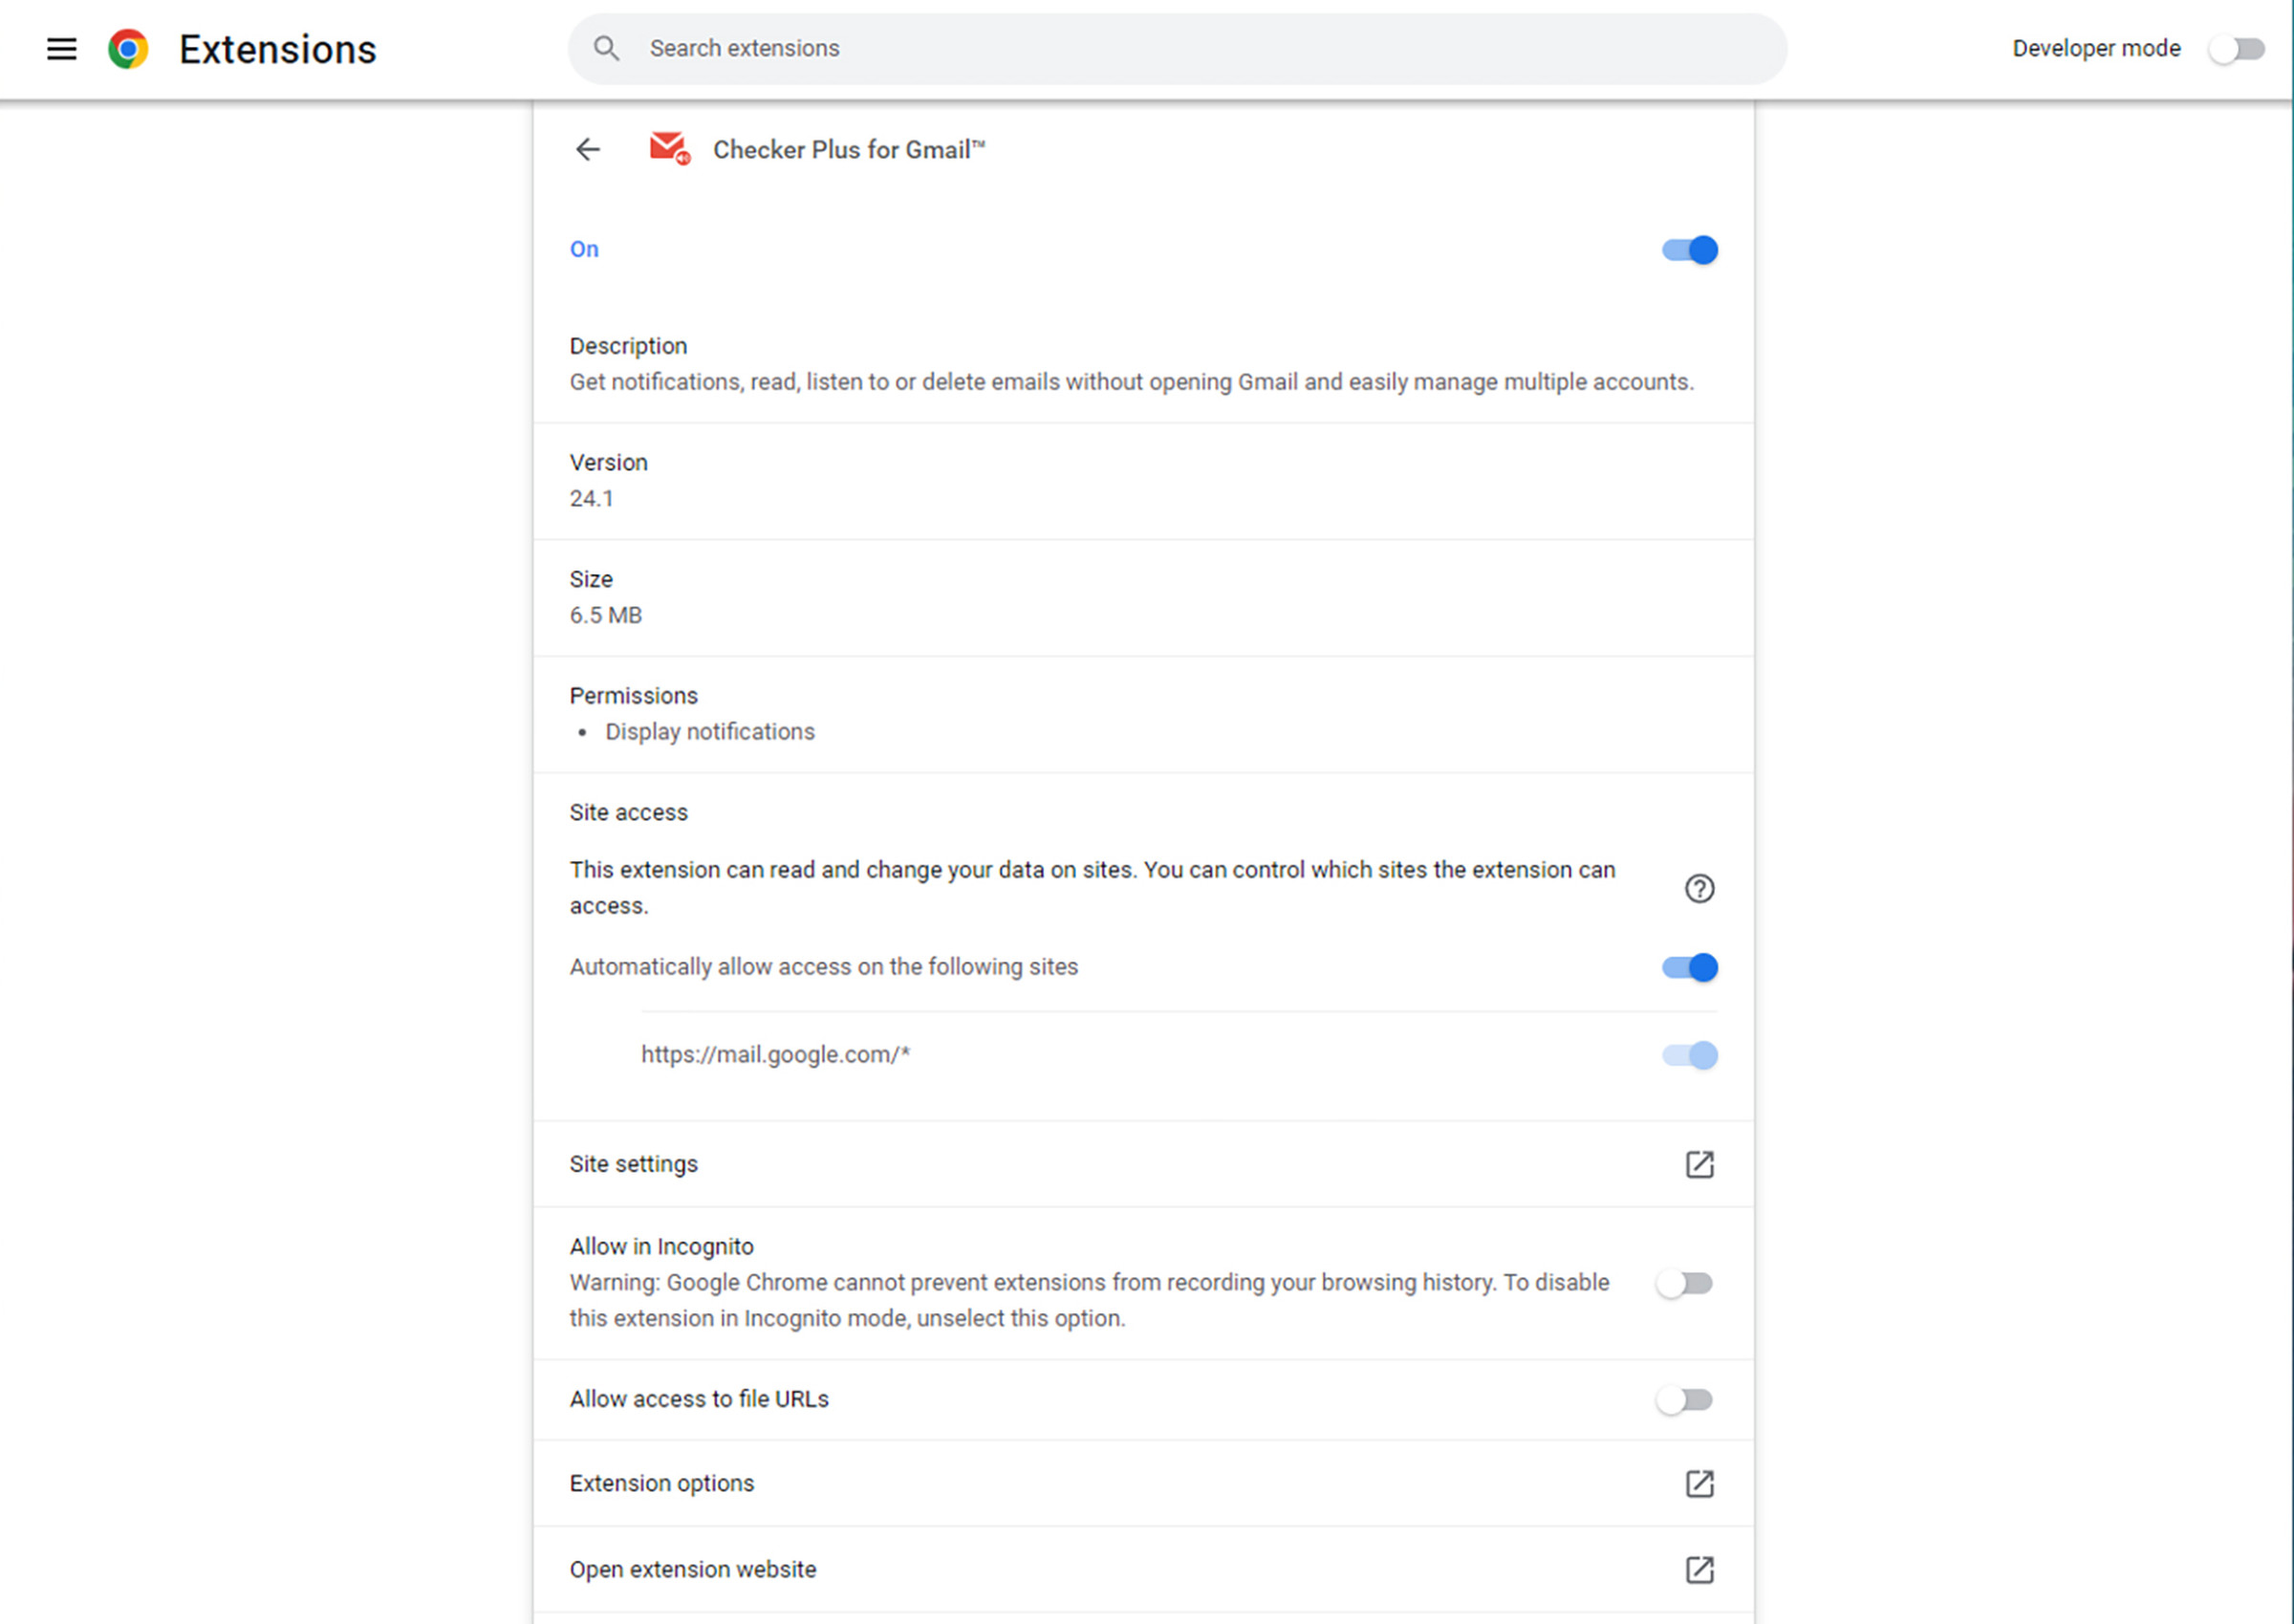 Page headed Extensions with information about the extention Checker Plus for Gmail.